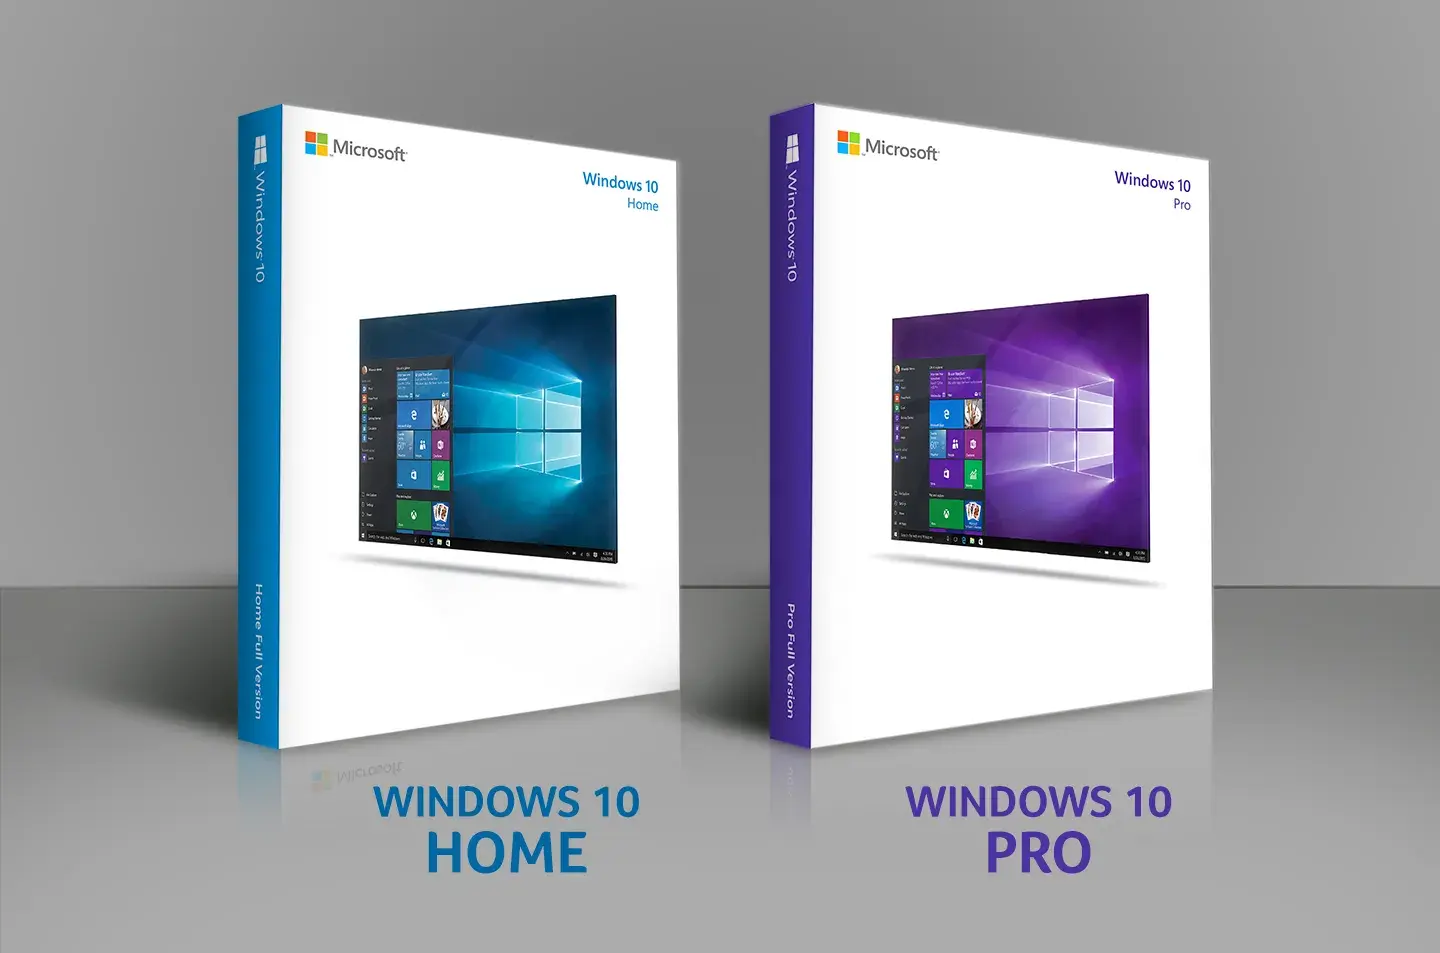 Windows 10 Home or Windows 10 Pro for Business?